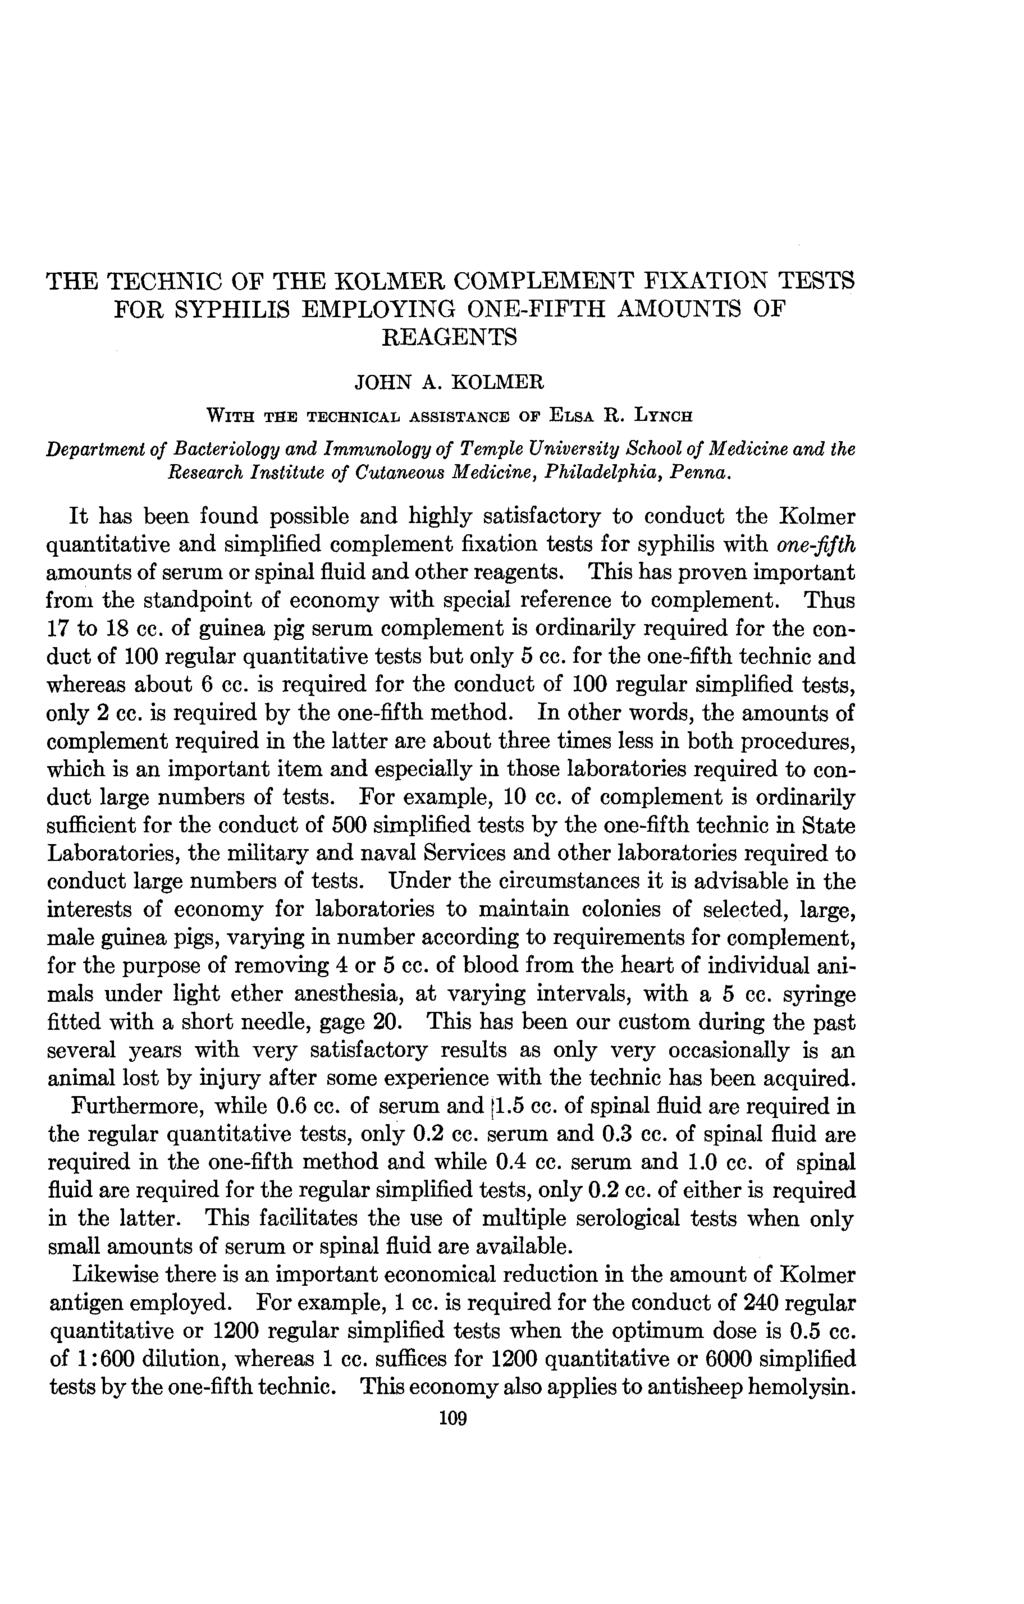 THE TECHNIC OF THE KOLMER COMPLEMENT FIXATION TESTS FOR SYPHILIS EMPLOYING ONE-FIFTH AMOUNTS OF REAGENTS JOHN A. KOLMER WITH THE TECHNICAL ASSISTANCE OP ELSA R.